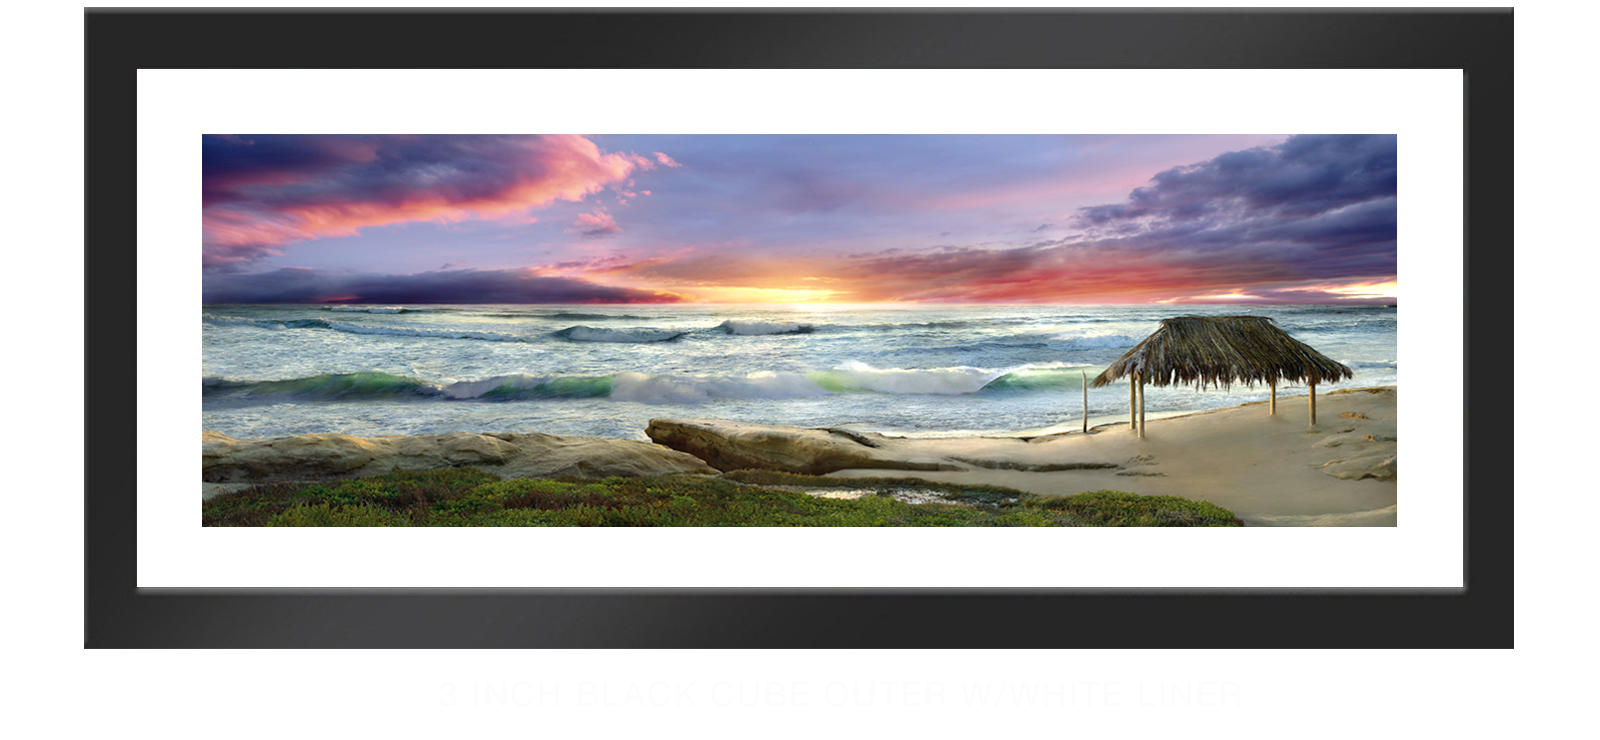 12AWAITANCE 3 Inch Black Cube Outer w_Wht Liner T